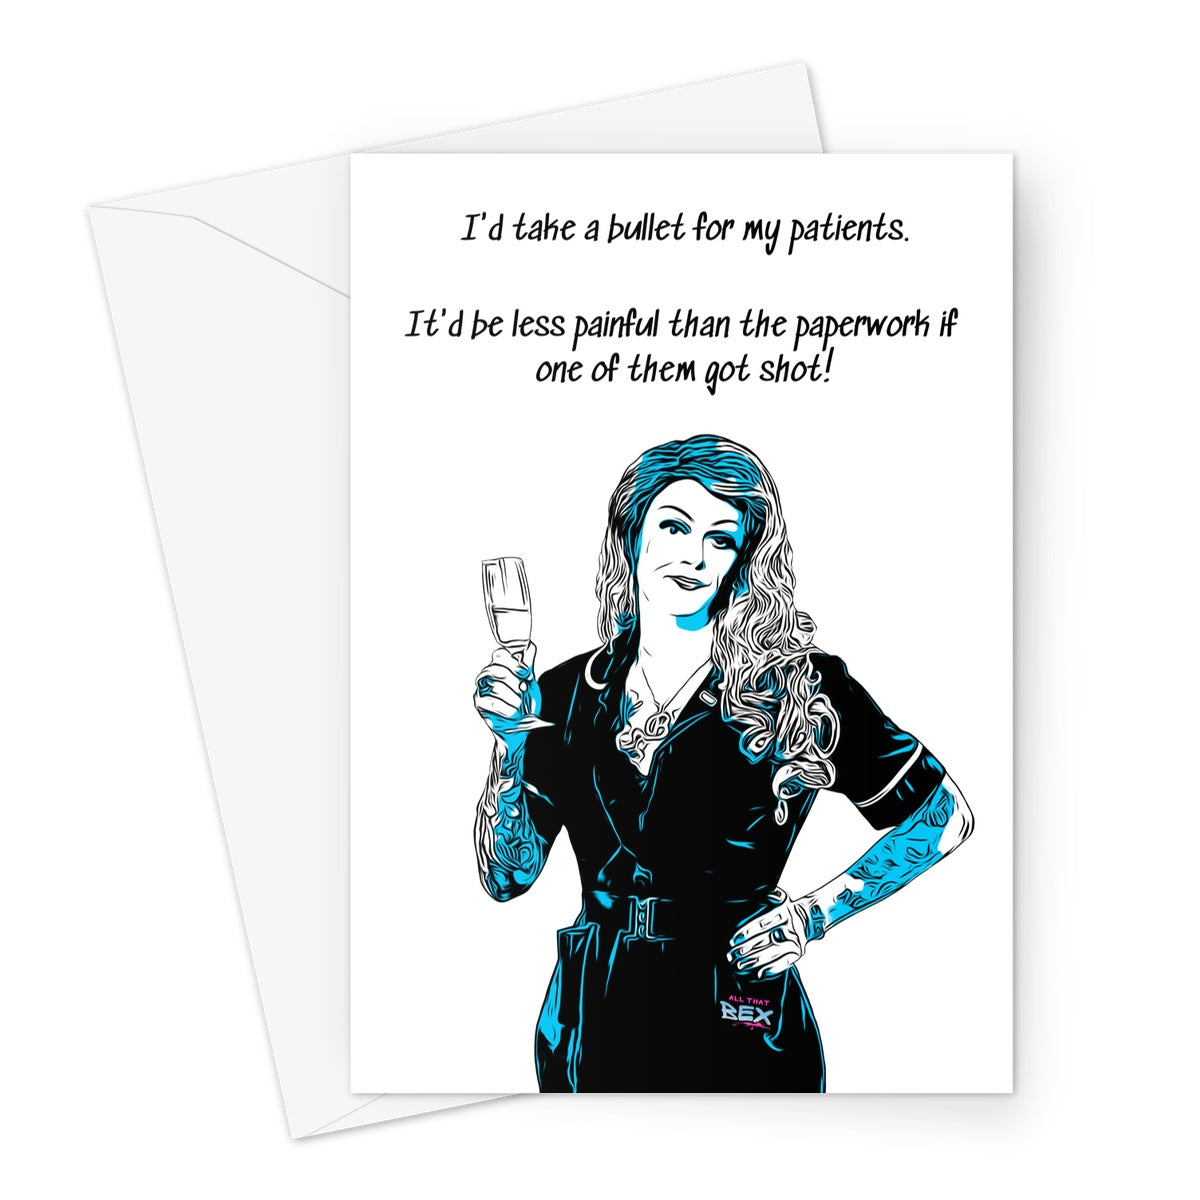 Blank greeting card with cartoon picture of Brandy Bex in her Band 6 NHS nurse uniform holding up a glass of sparkling wine. The All That Bex logo is towards the lower half of the blank card. Above Brandy's head is a quote in black which states "I'd take a bullet for my patients. It'd be less painful than the paperwork if one of them got shot!"